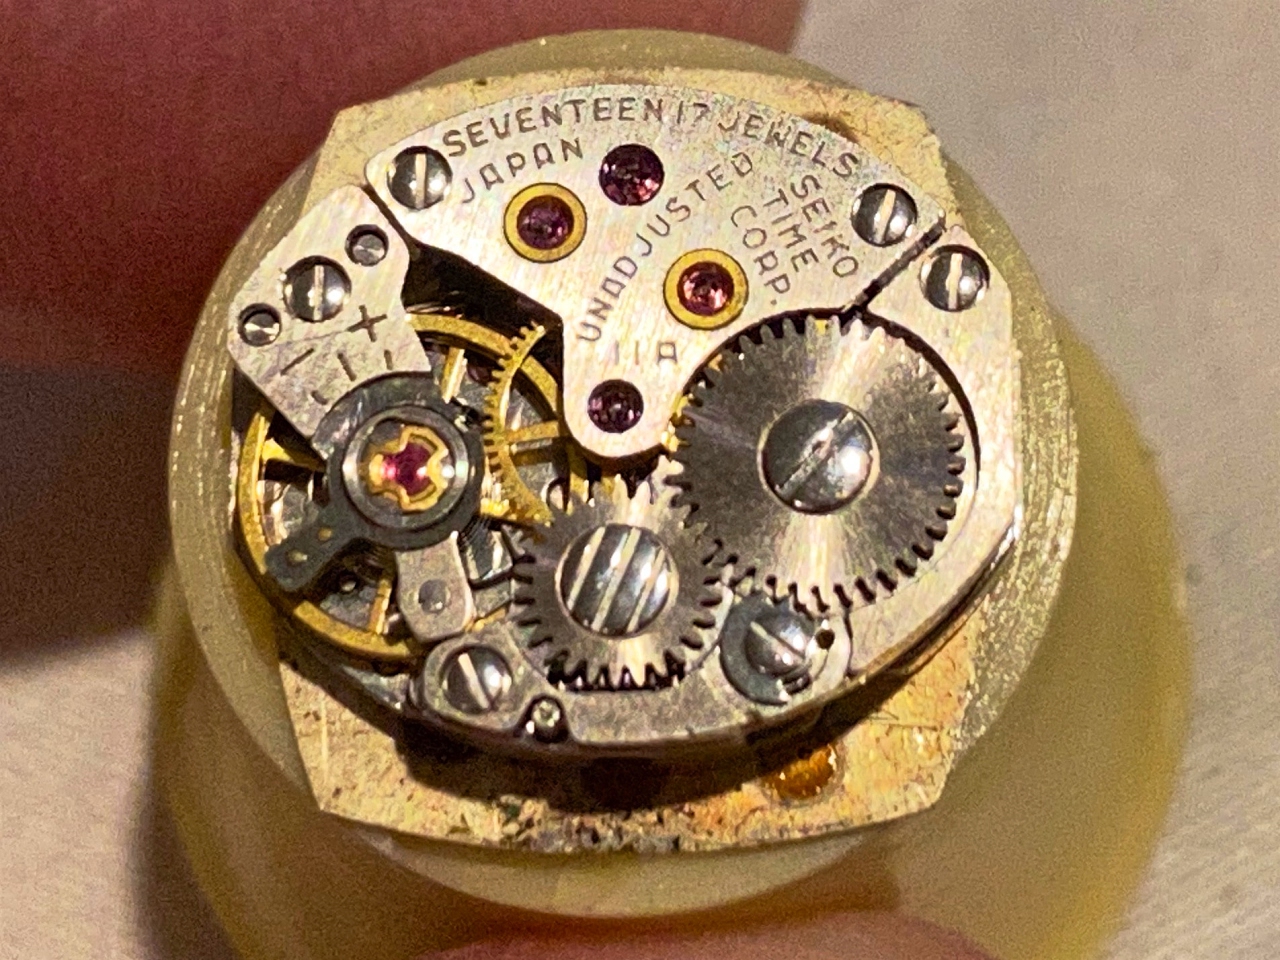 WatchTech - Thoughts on small and shapely ladies